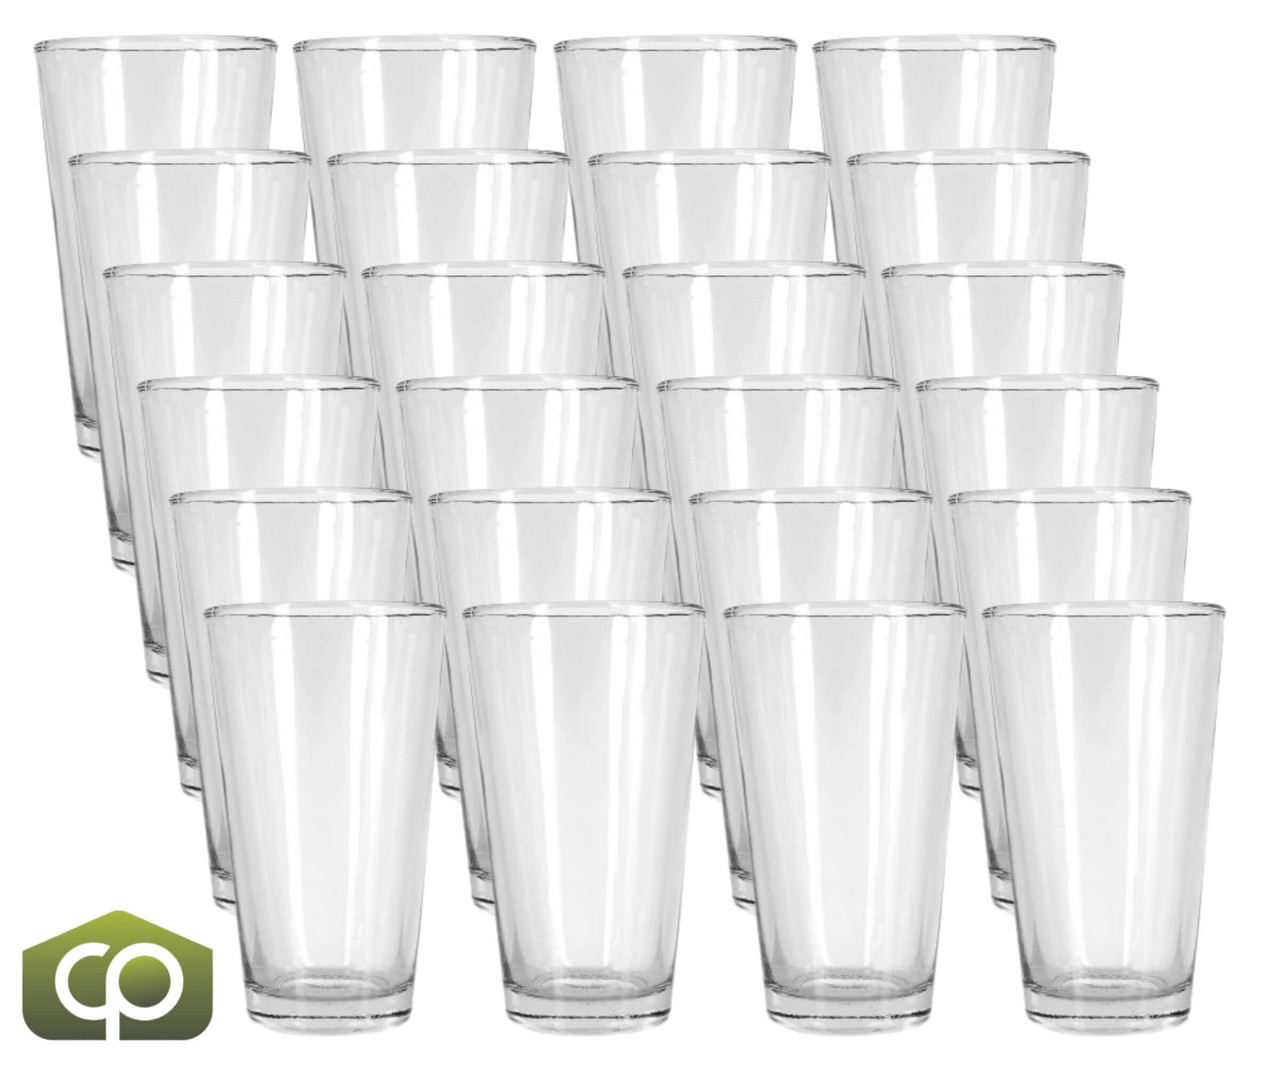 Anchor 7176FU 16 oz Mixing Glass, Rim-Tempered, Clear Glass Construction 24/Case - Chicken Pieces